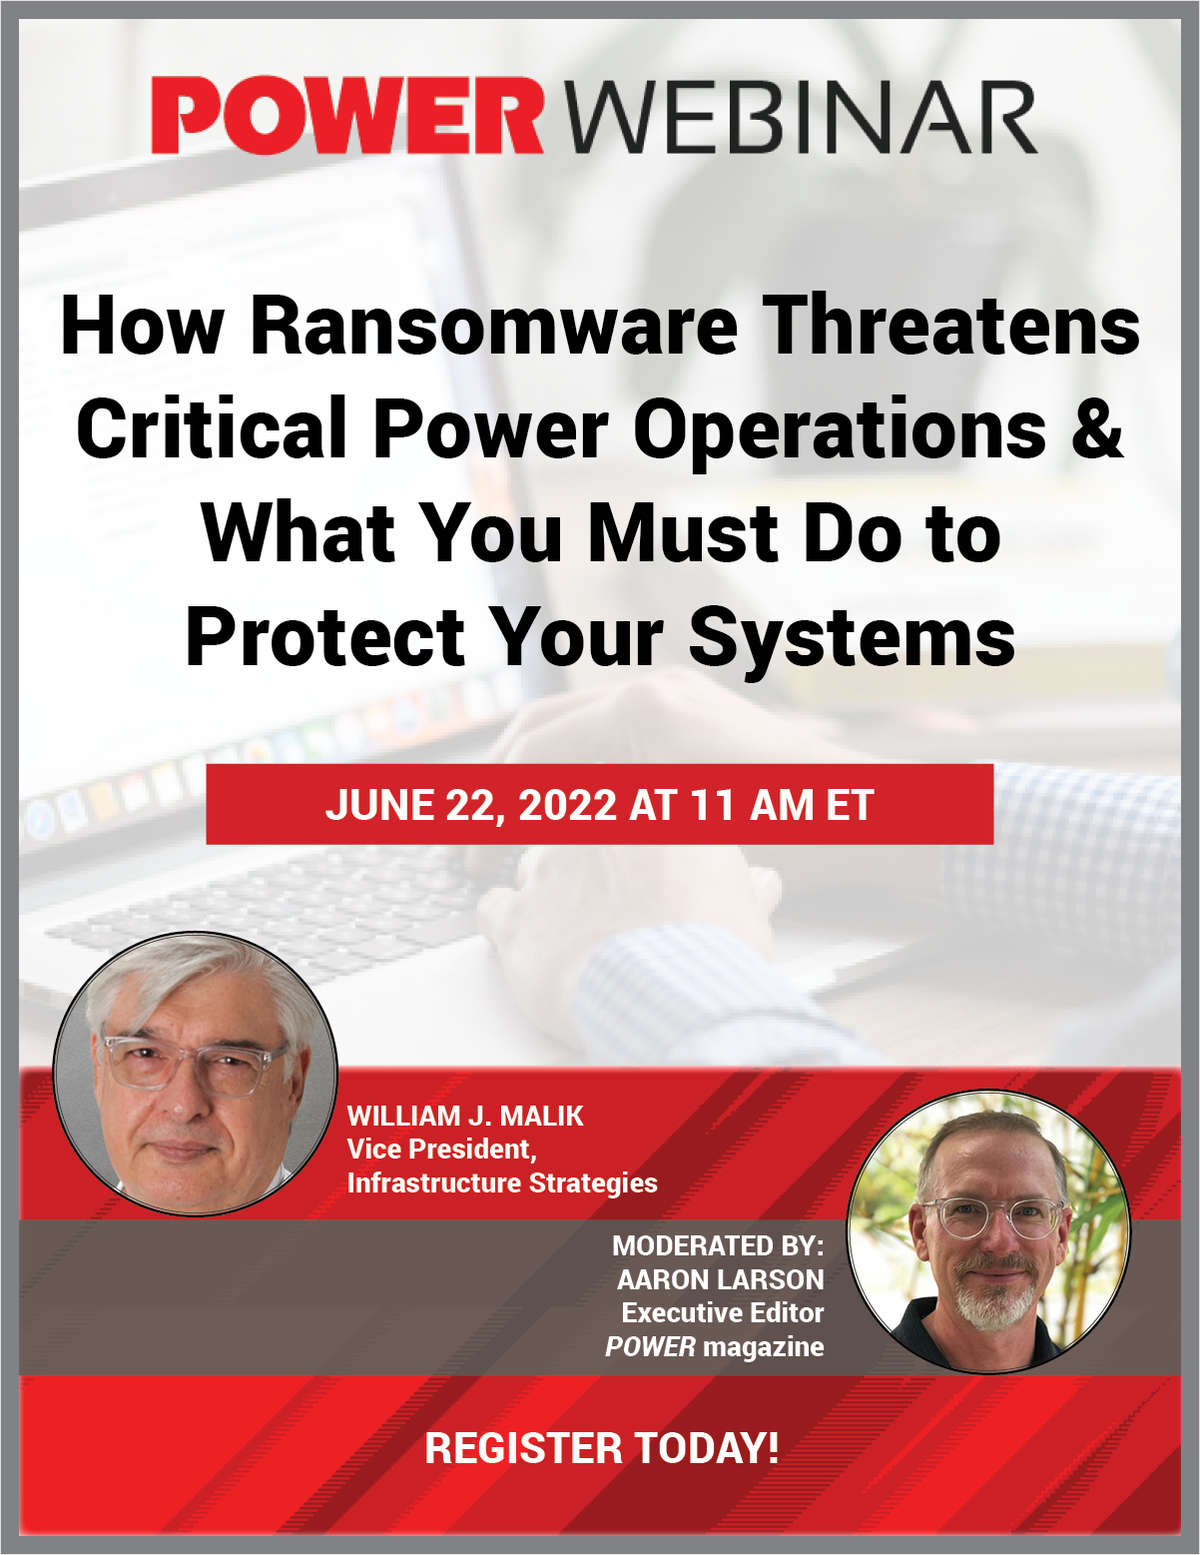 How Ransomware Threatens Critical Power Operations & What You Must Do to Protect Your Systems